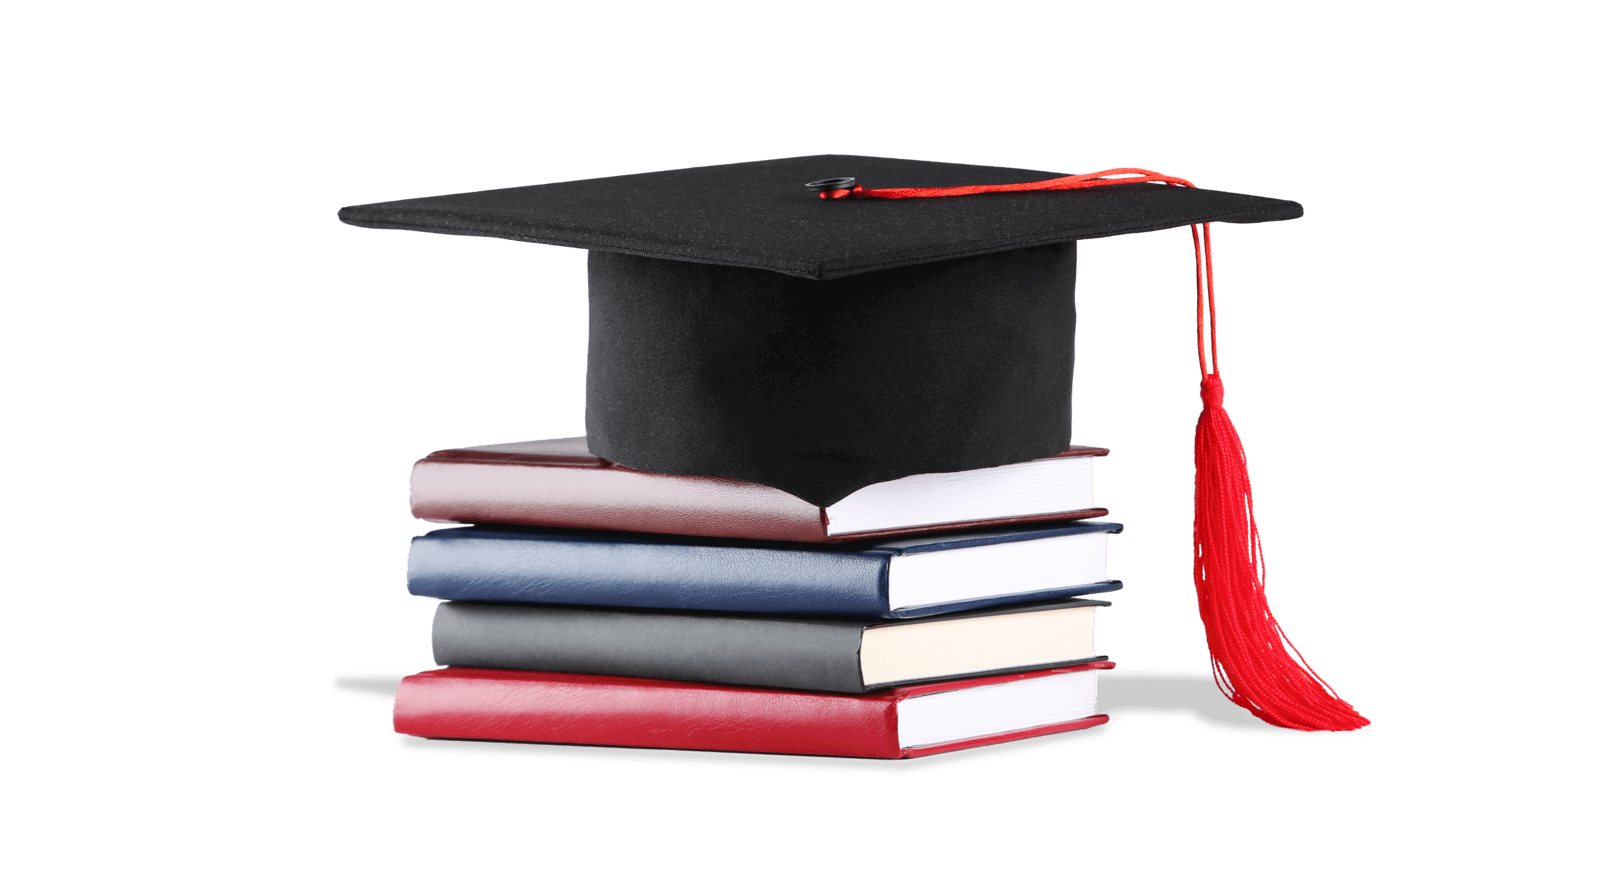 Mortarboard and books